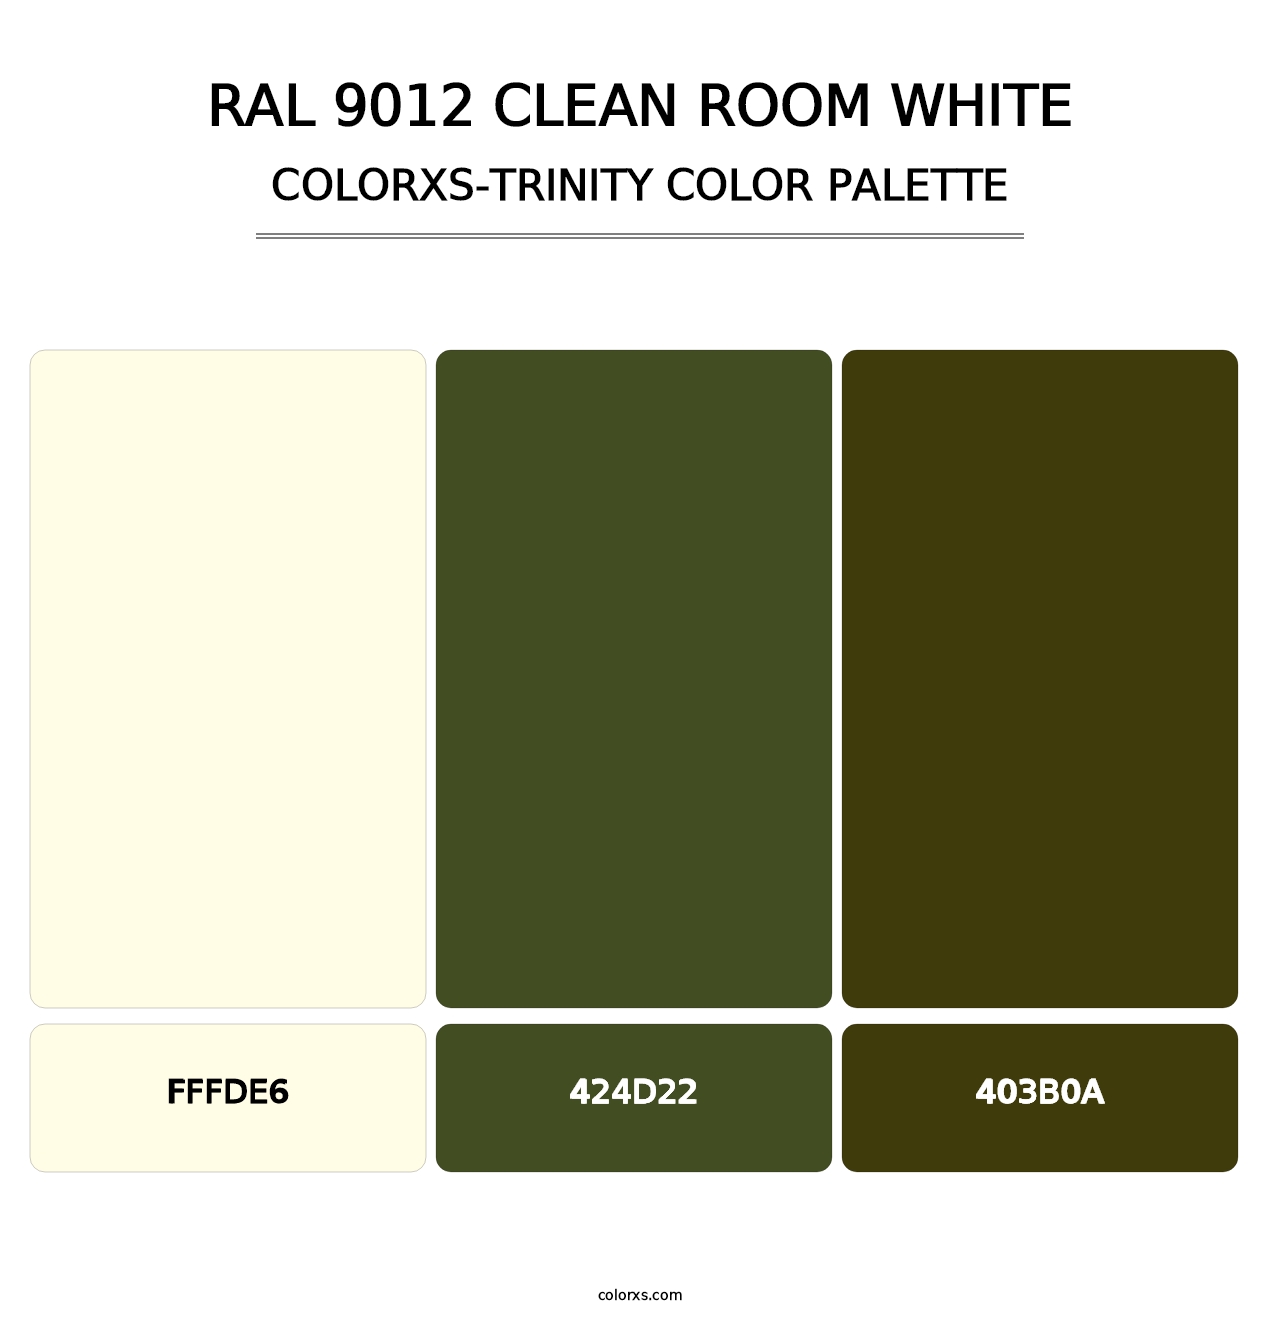 RAL 9012 Clean Room White - Colorxs Trinity Palette